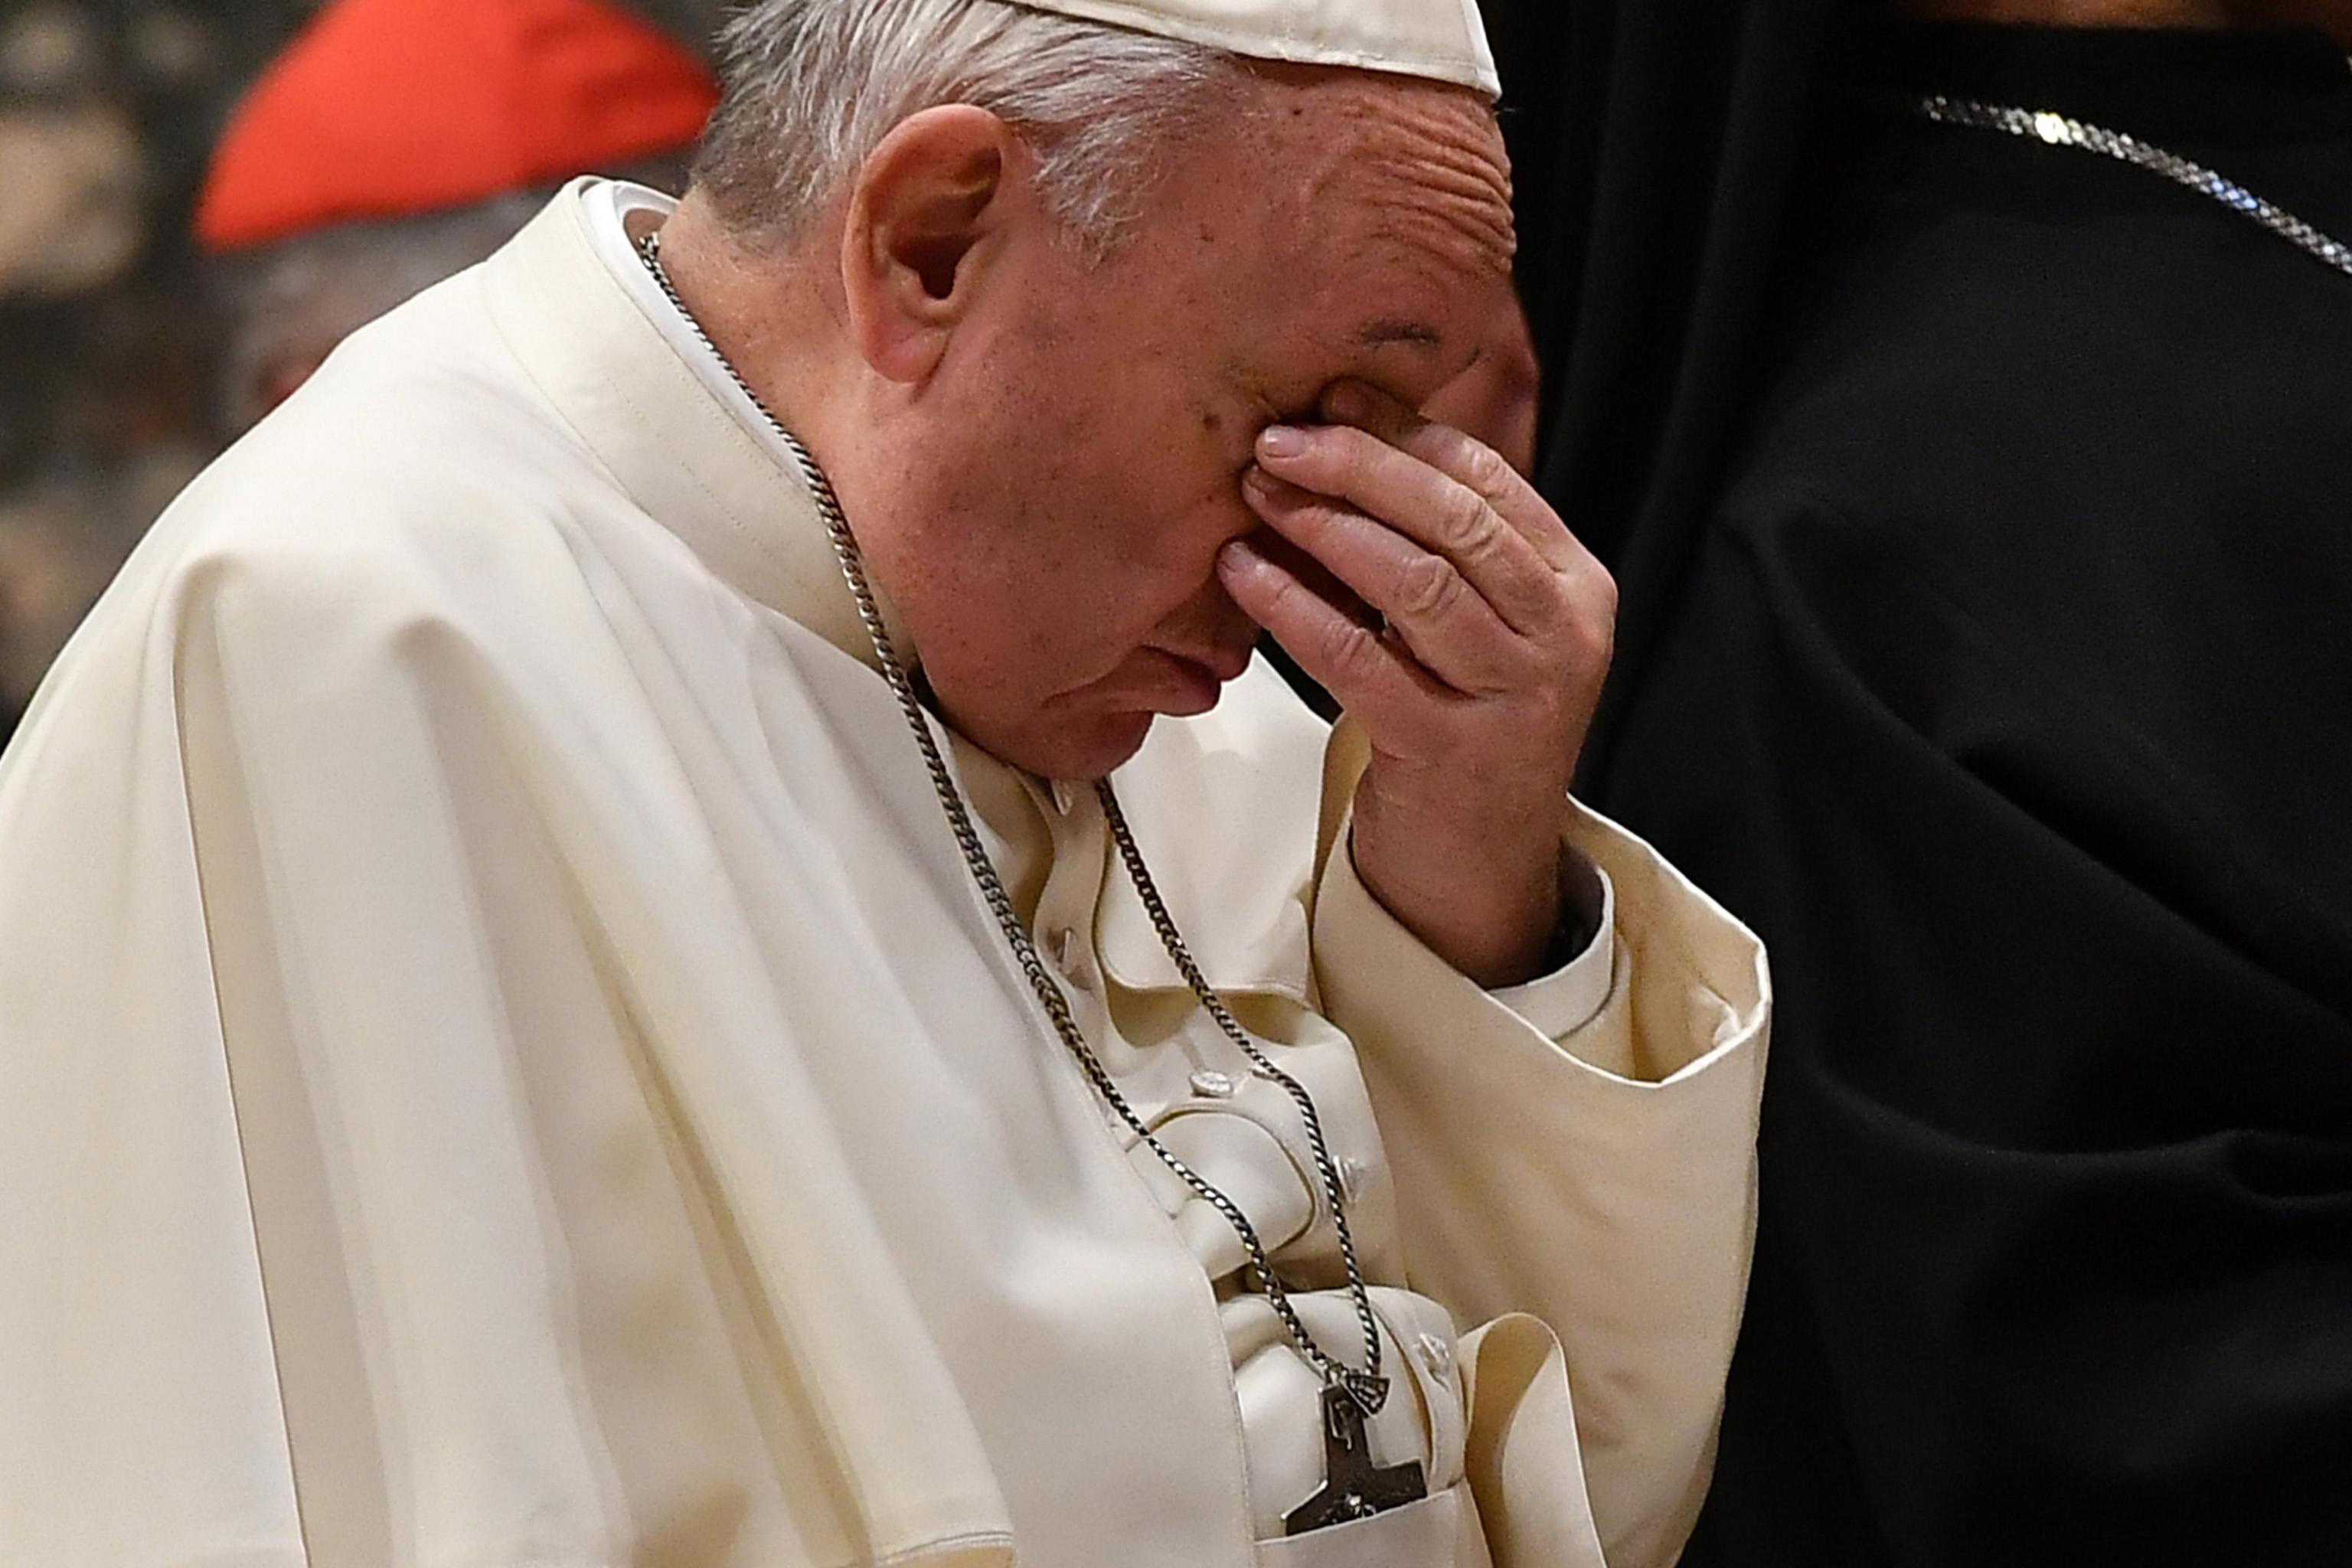 epa07391042 Pope Francis reacts as he takes part in a liturgical prayer along with cardinals within the third day of a landmark Vatican summit on tackling paedophilia in the clergy, at the Vatican, 23 February 2019.  EPA/VINCENZO PINTO / POOL